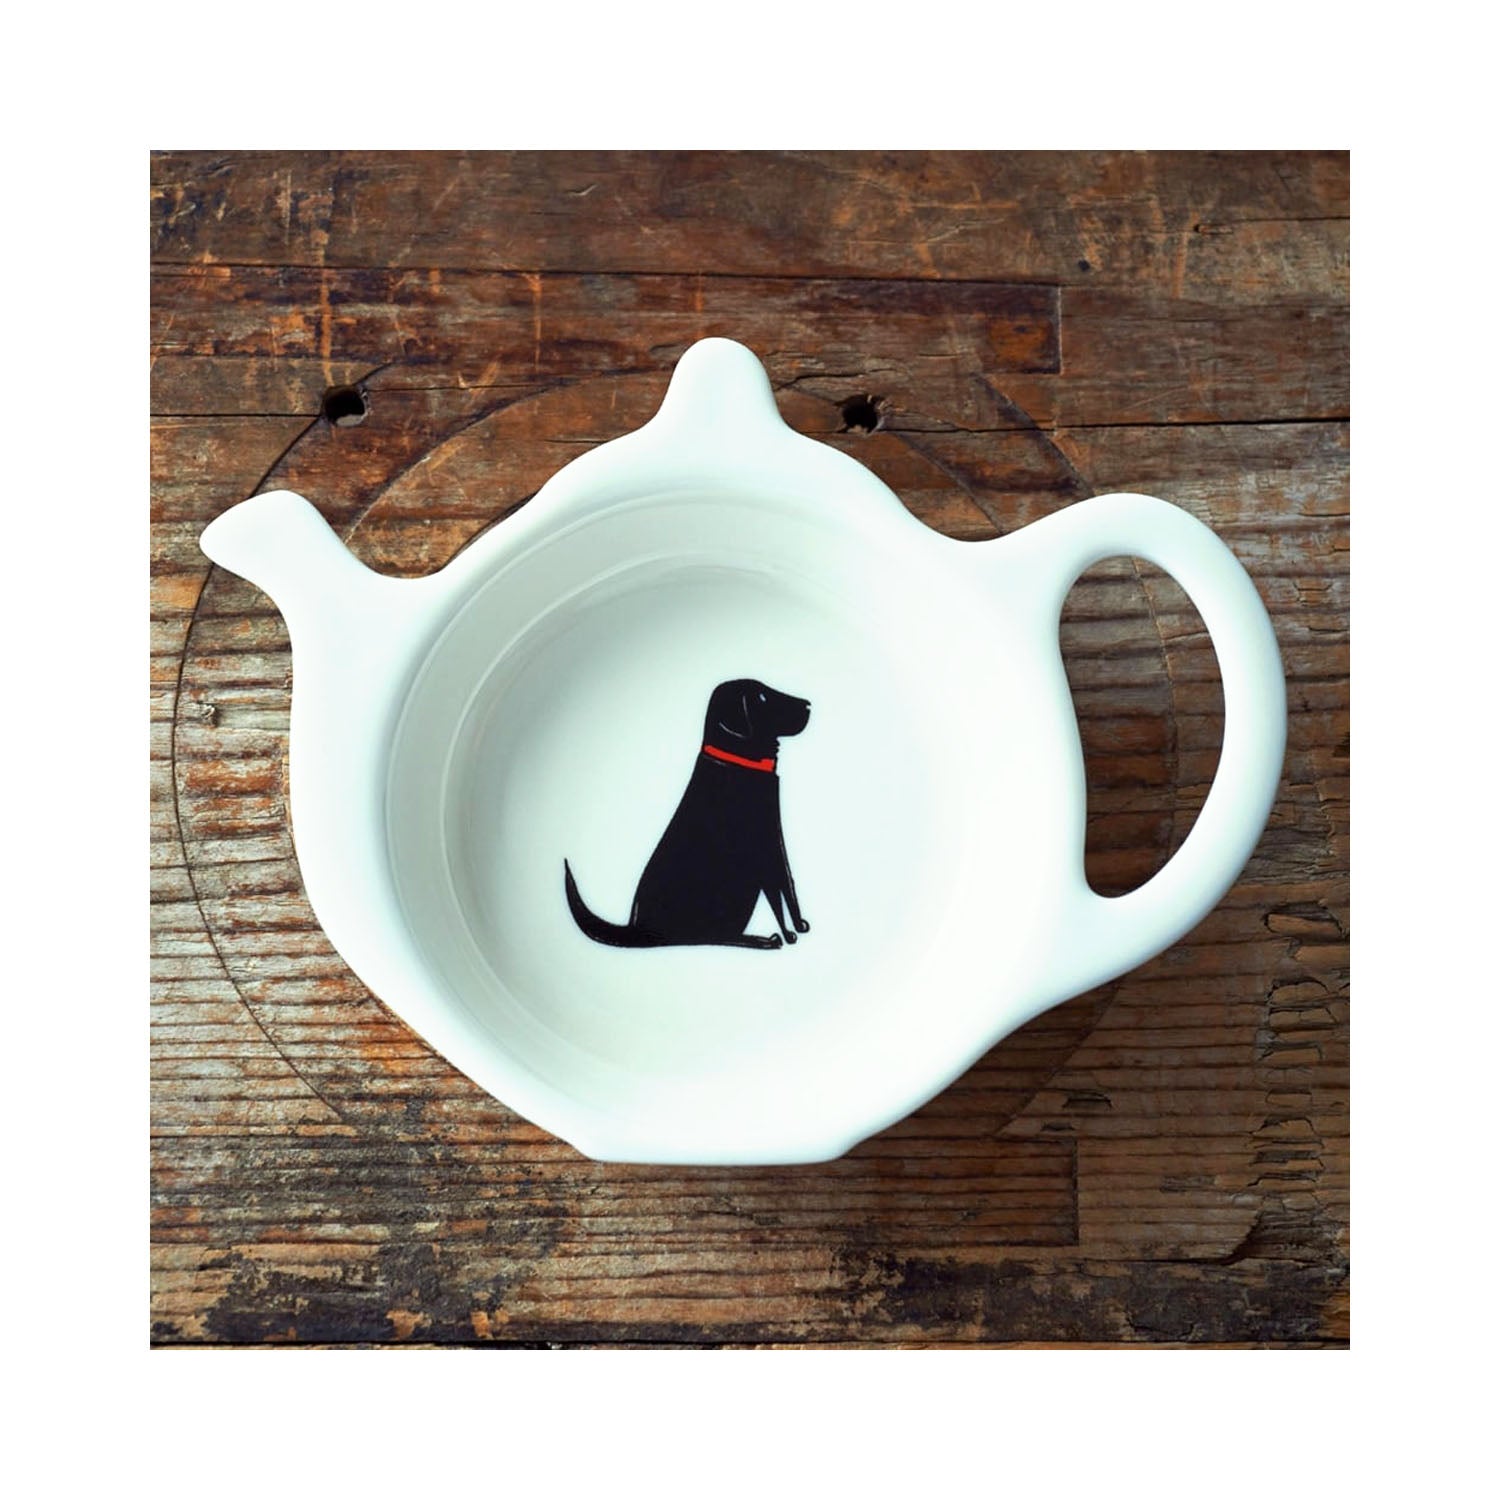 Dog Lover Gifts available at Dog Krazy Gifts - William The Black Labrador Teabag Dish by Sweet William - part of the Labrador collection of Dog Lovers Gifts available from Dog Krazy Gifts